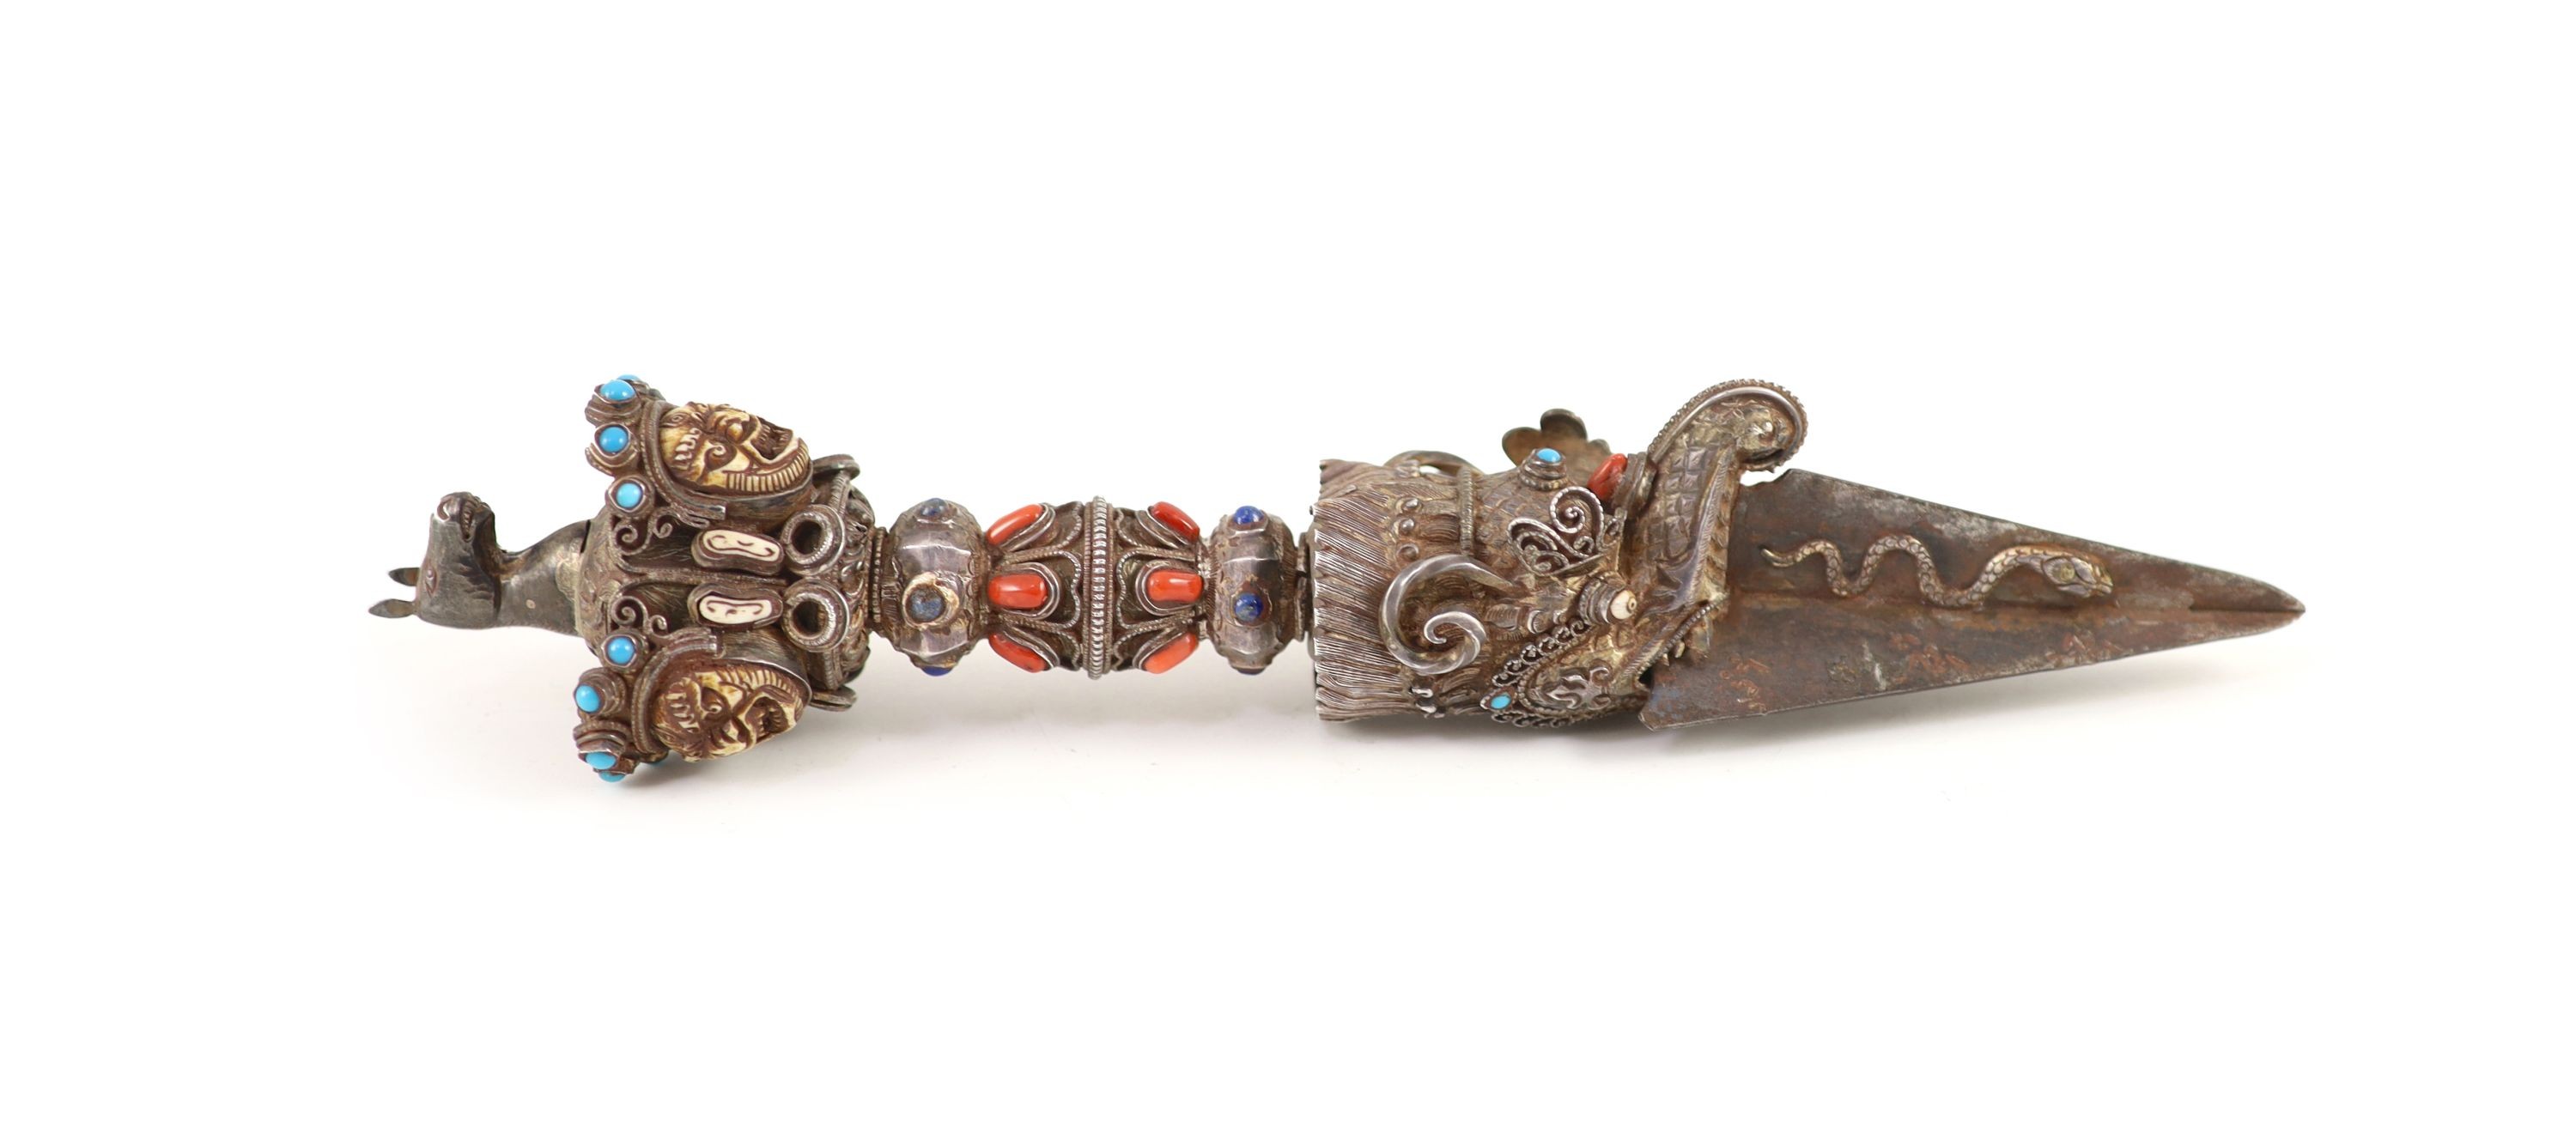 A Tibetan silver, bone and gem set phurbu (ritual dagger), 19th/20th century, 27.5 cm long, some of the stones replaced with glass                                                                                          